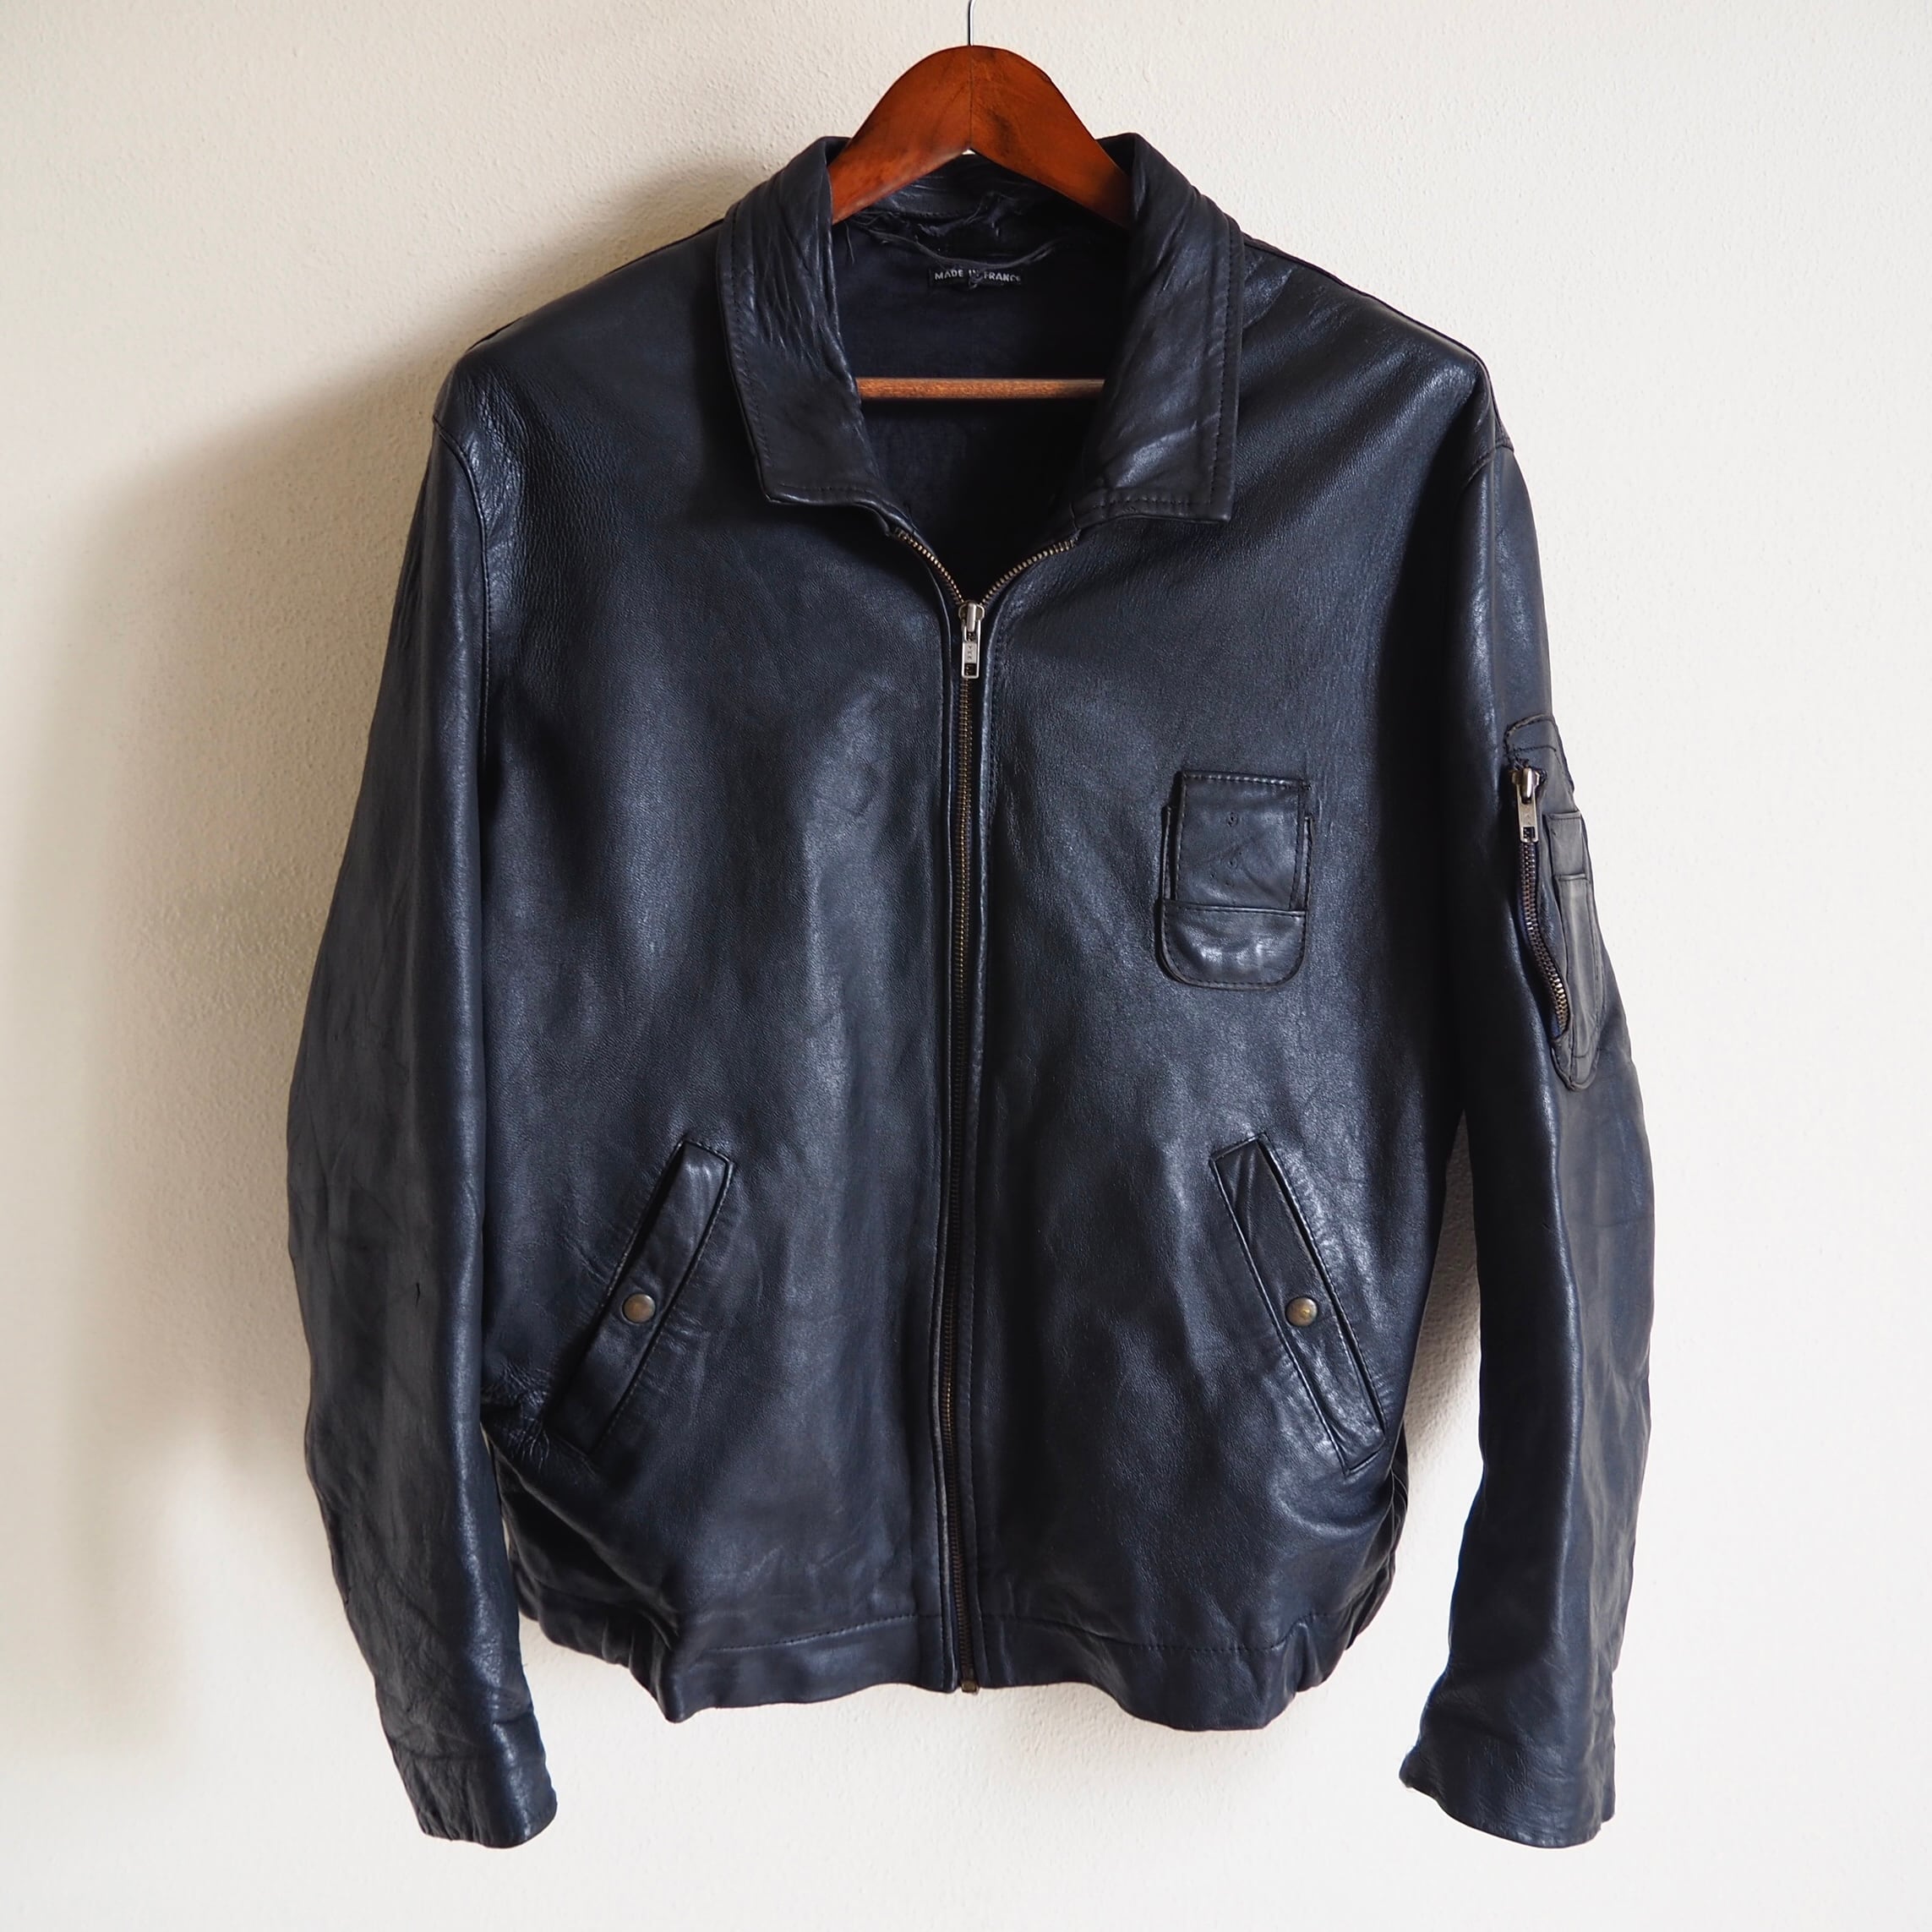 Condition-UsedFrench Leather Pilot Jacket